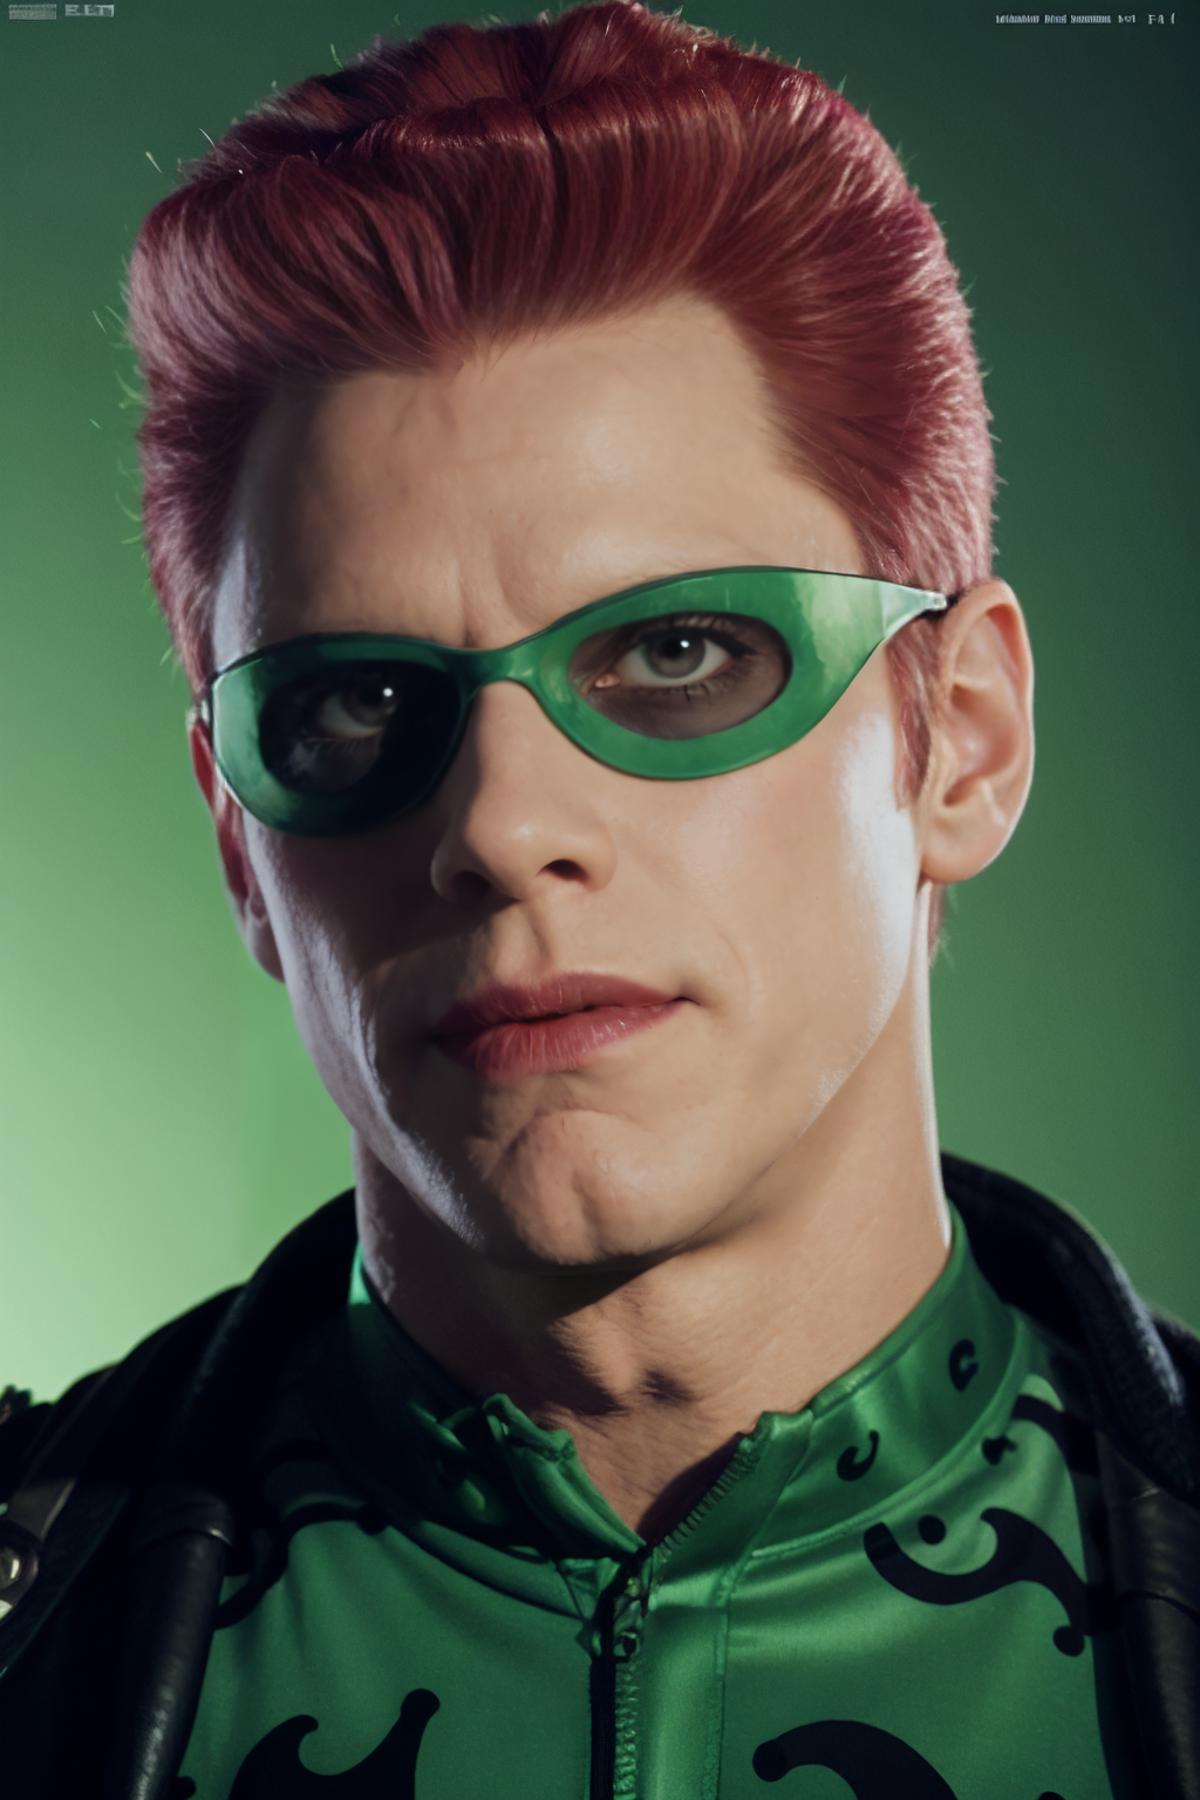 Jim Carrey's The Riddler image by Jondze